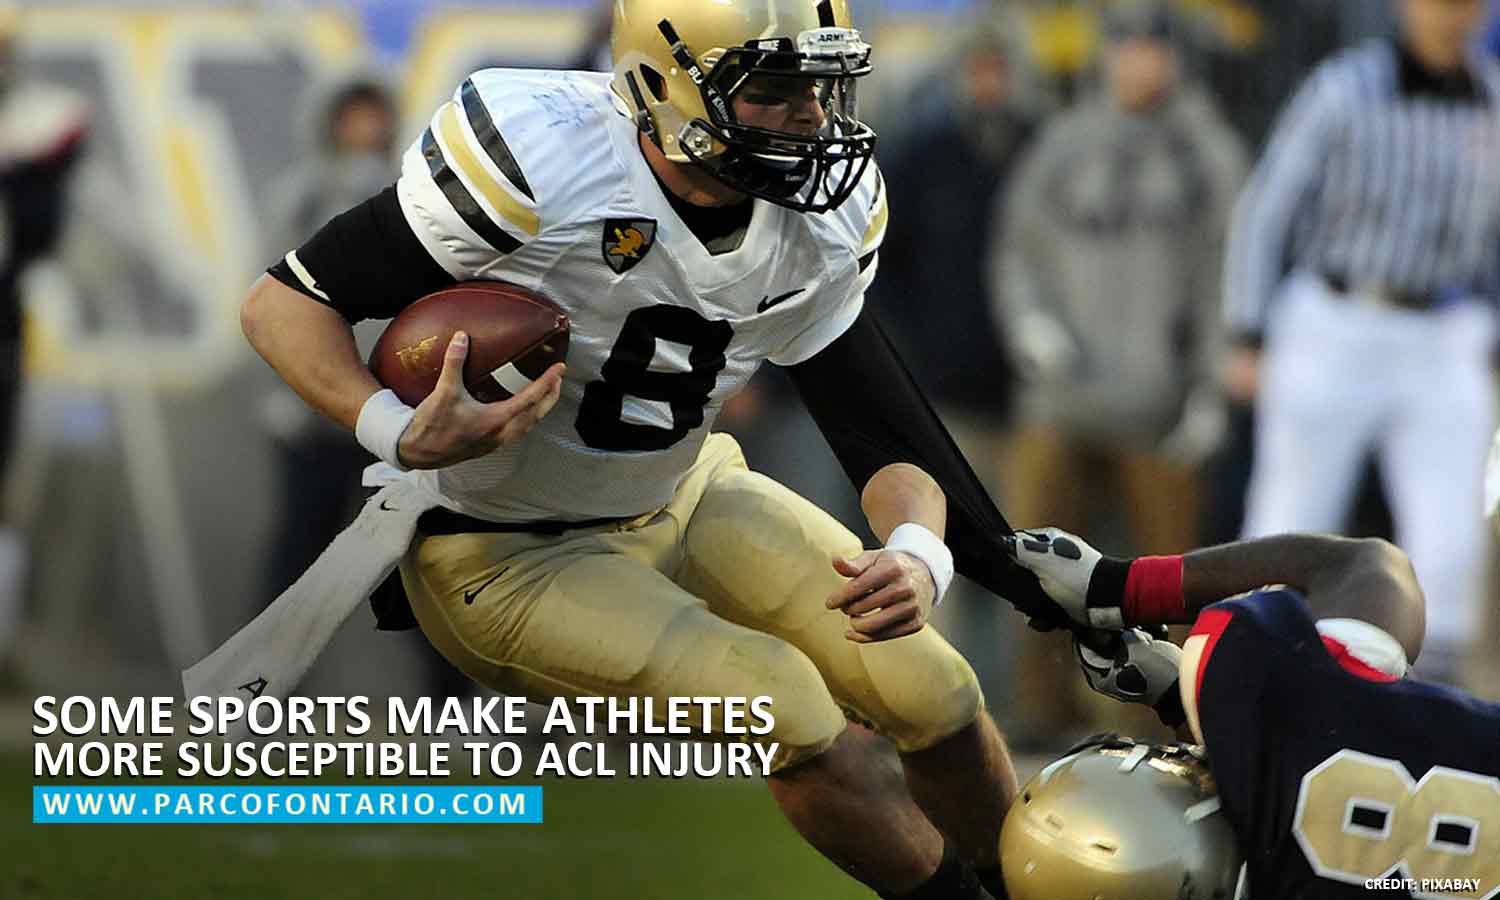 Some sports make athletes more susceptible